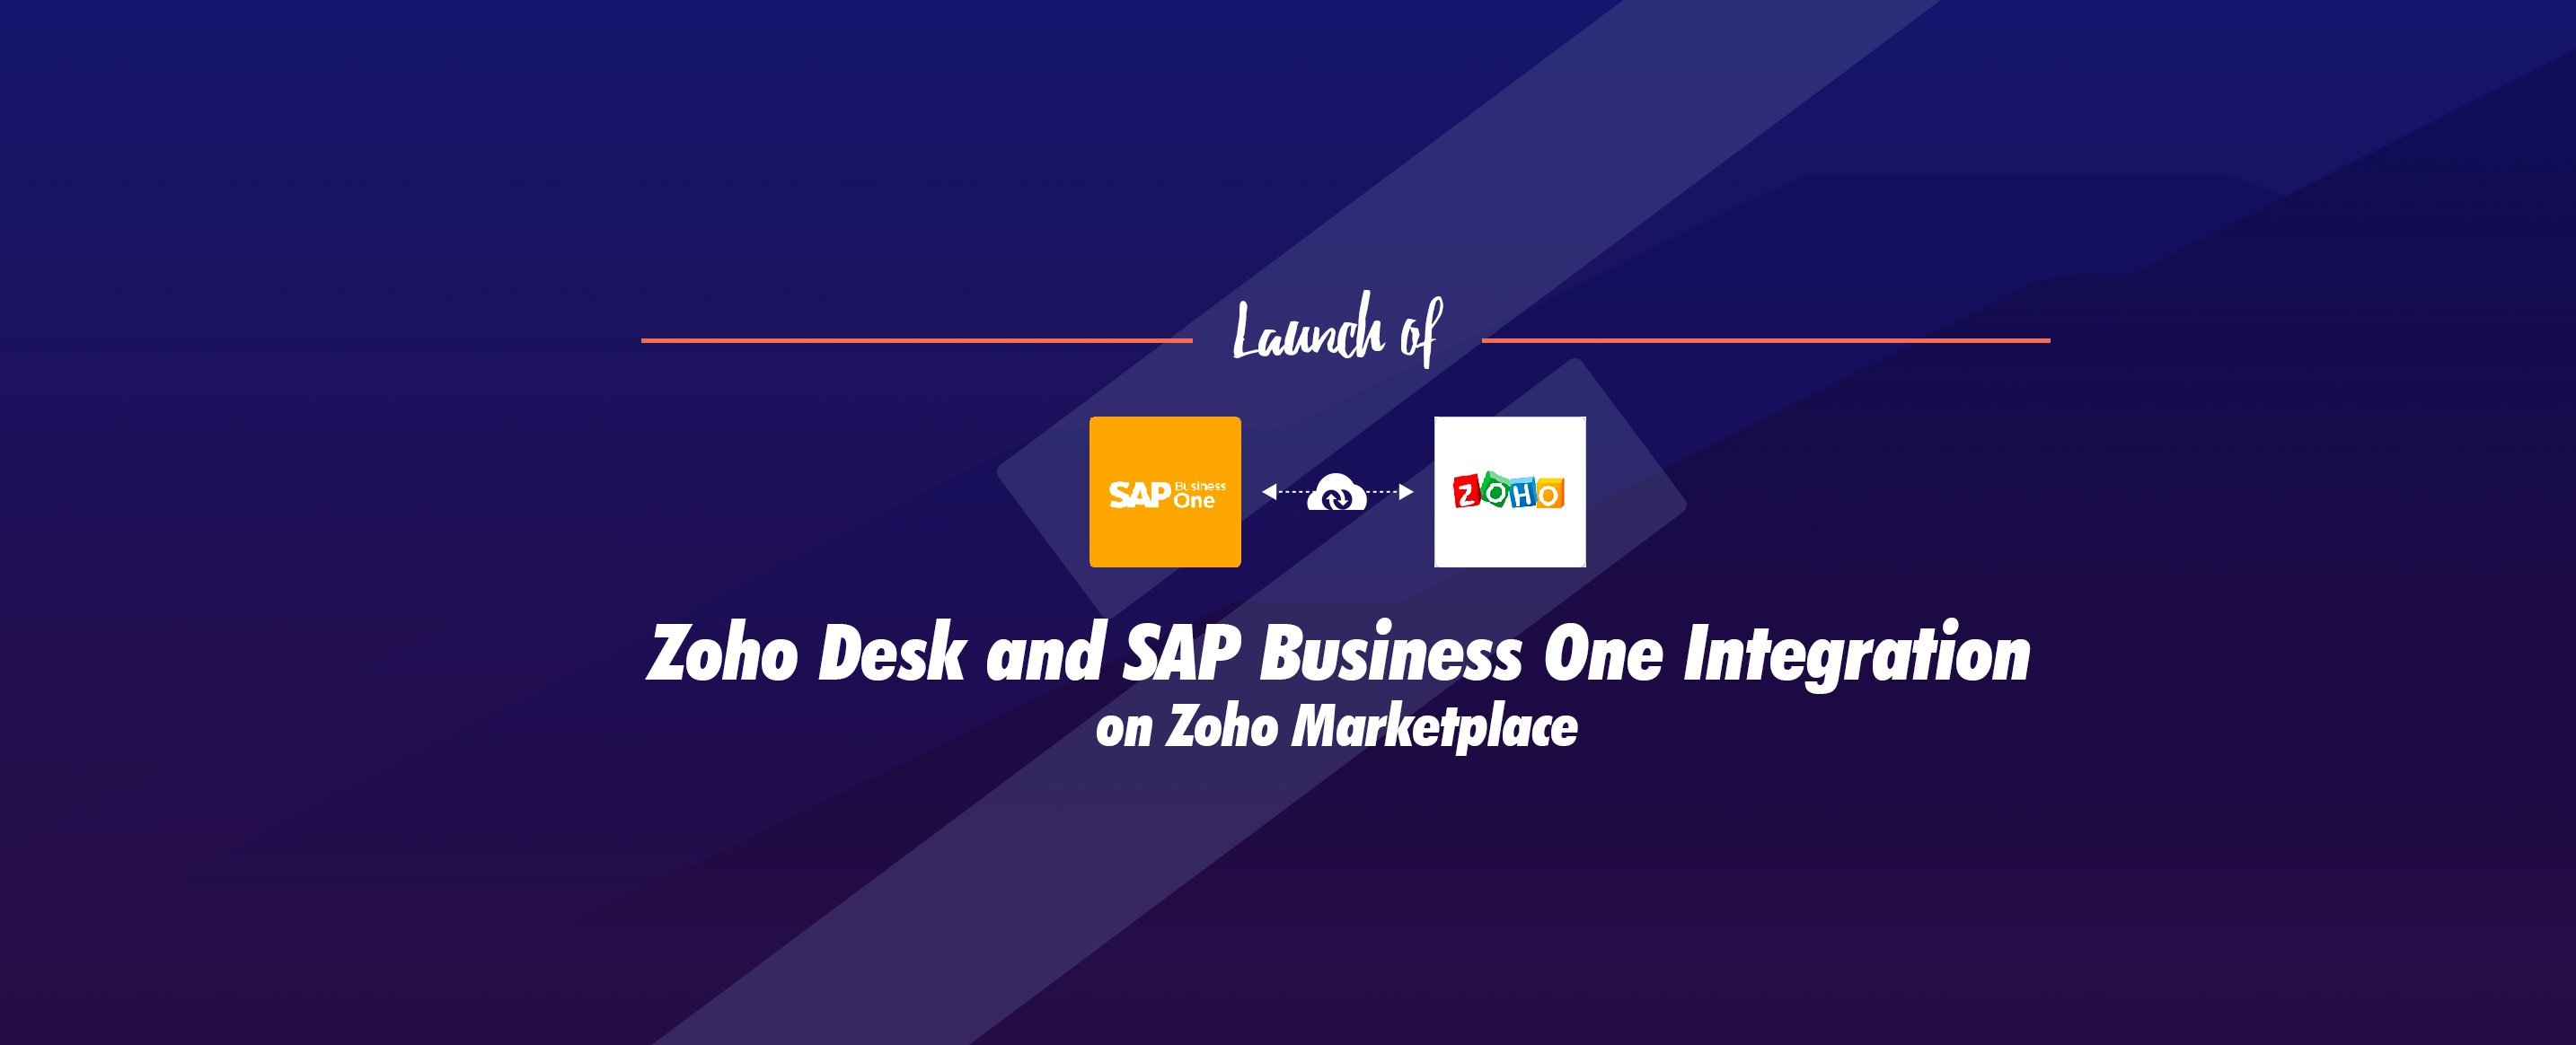 Launch-of-Zoho-Desk-and-SAP-Business-One-Integration-on-Zoho-Marketplace